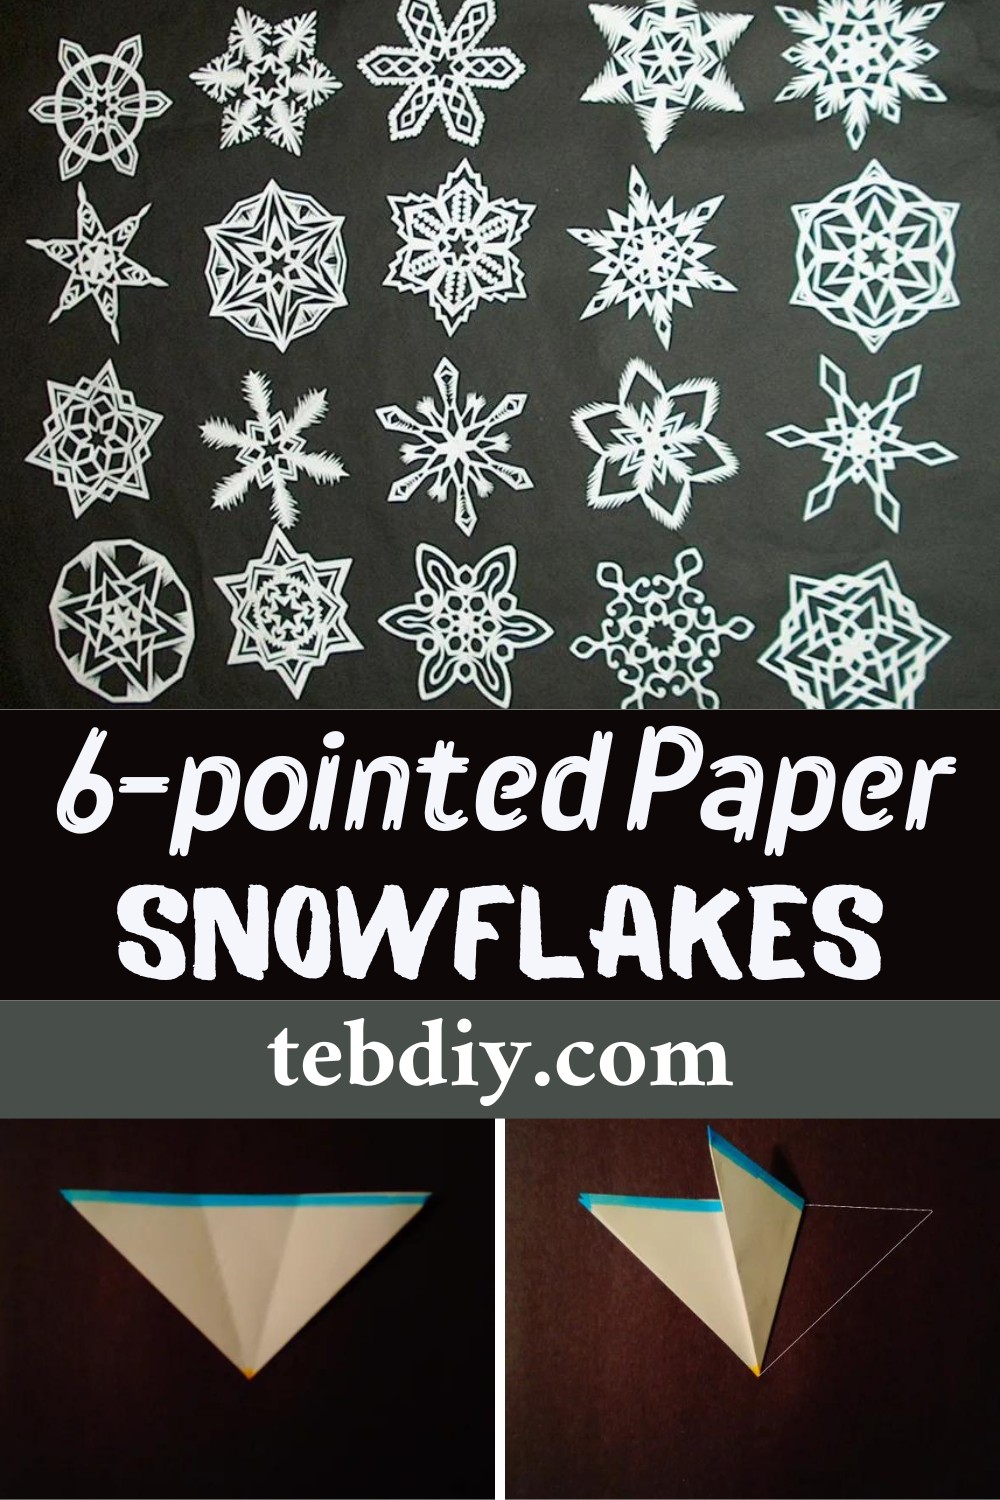 6-pointed Paper Snowflakes